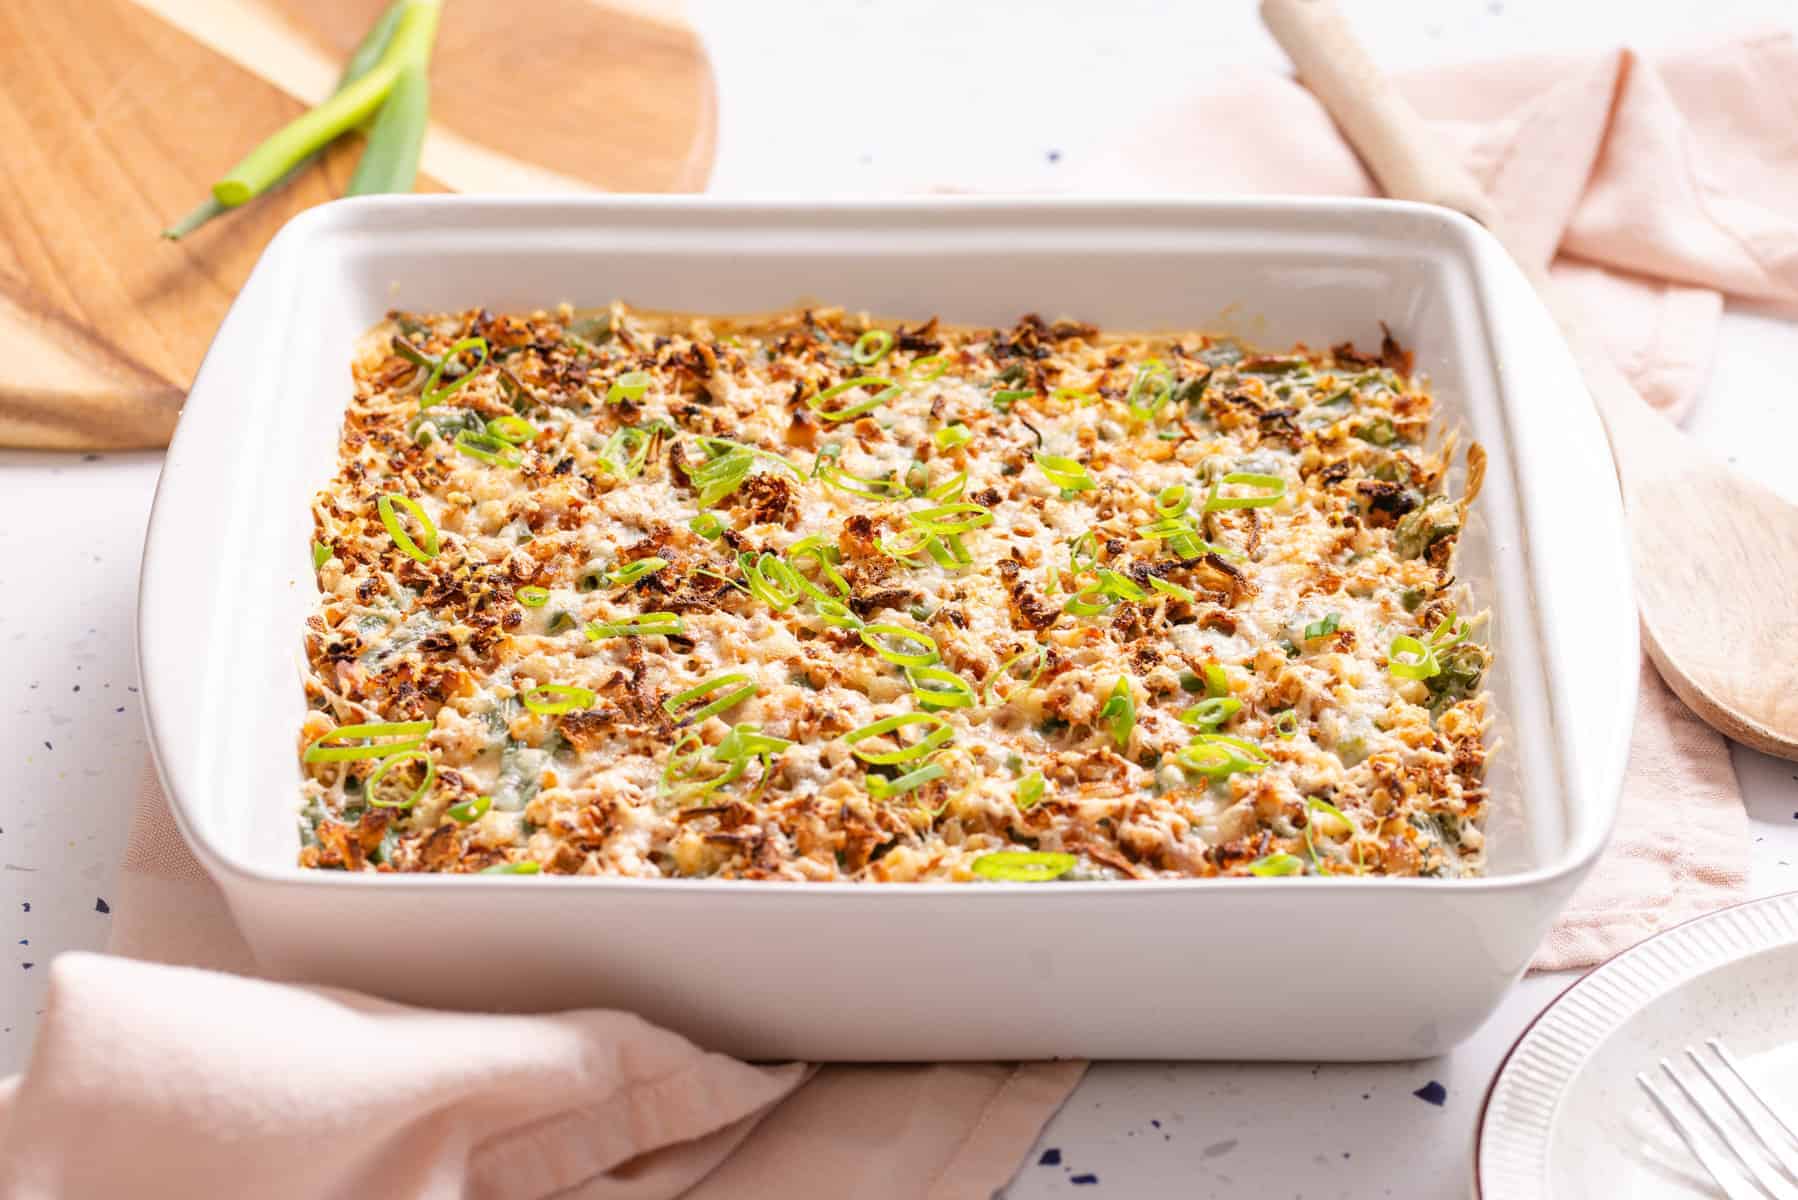 A  Green Bean Casserole with Cream Cheese topped with a golden-brown crust and garnished with sliced green onions.